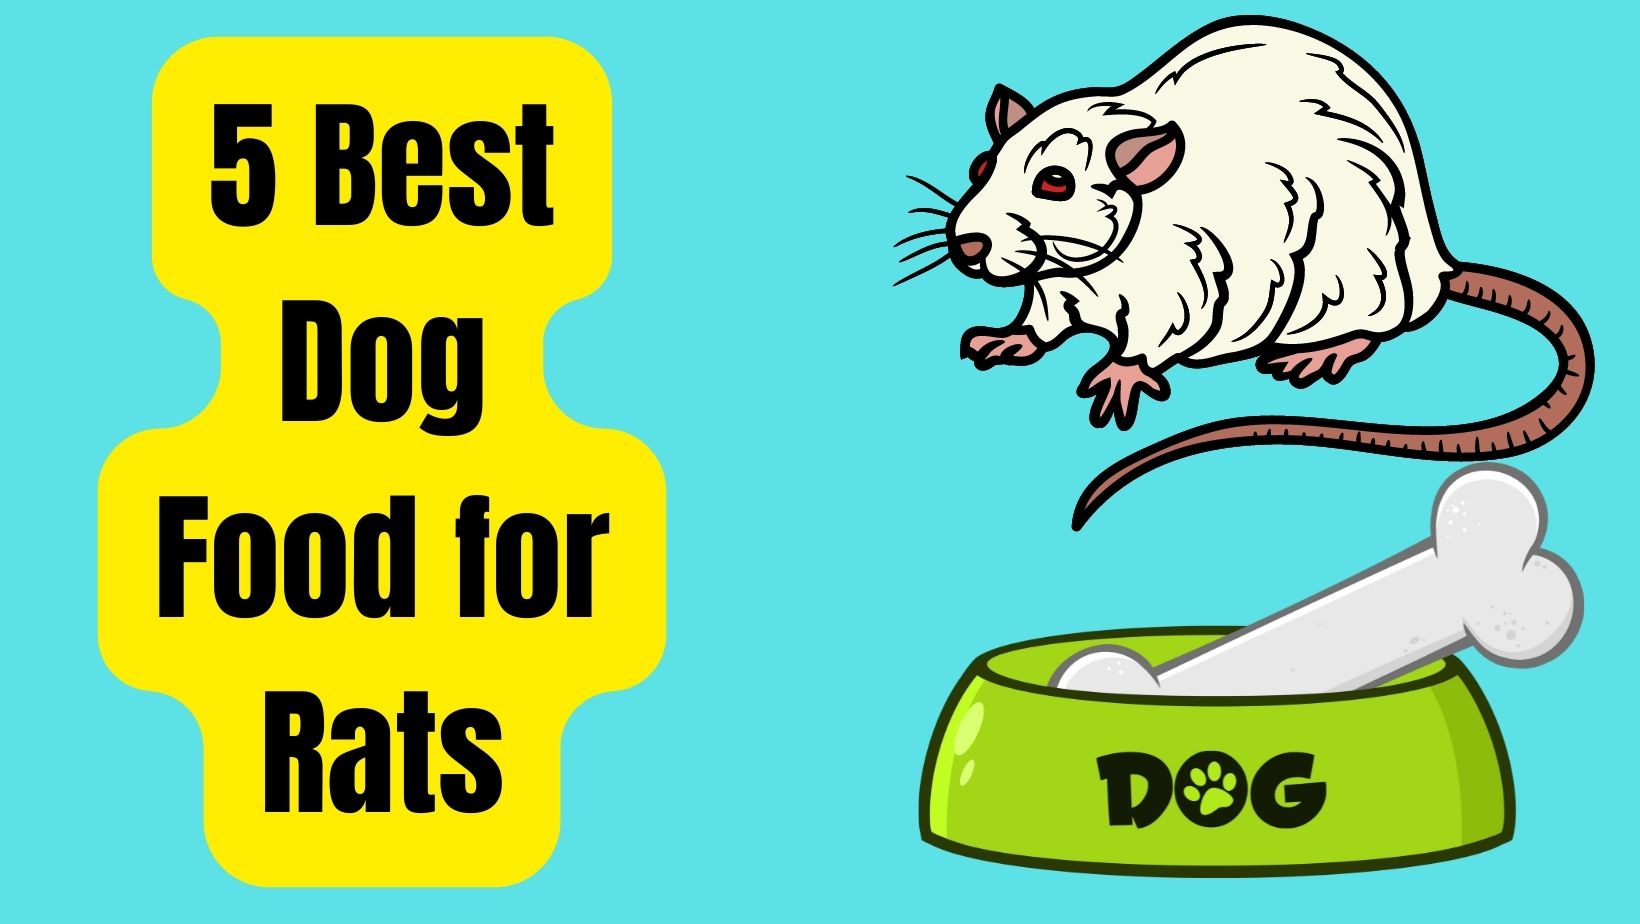 5 Best Dog Food for Rats – No.3 Will Shock You